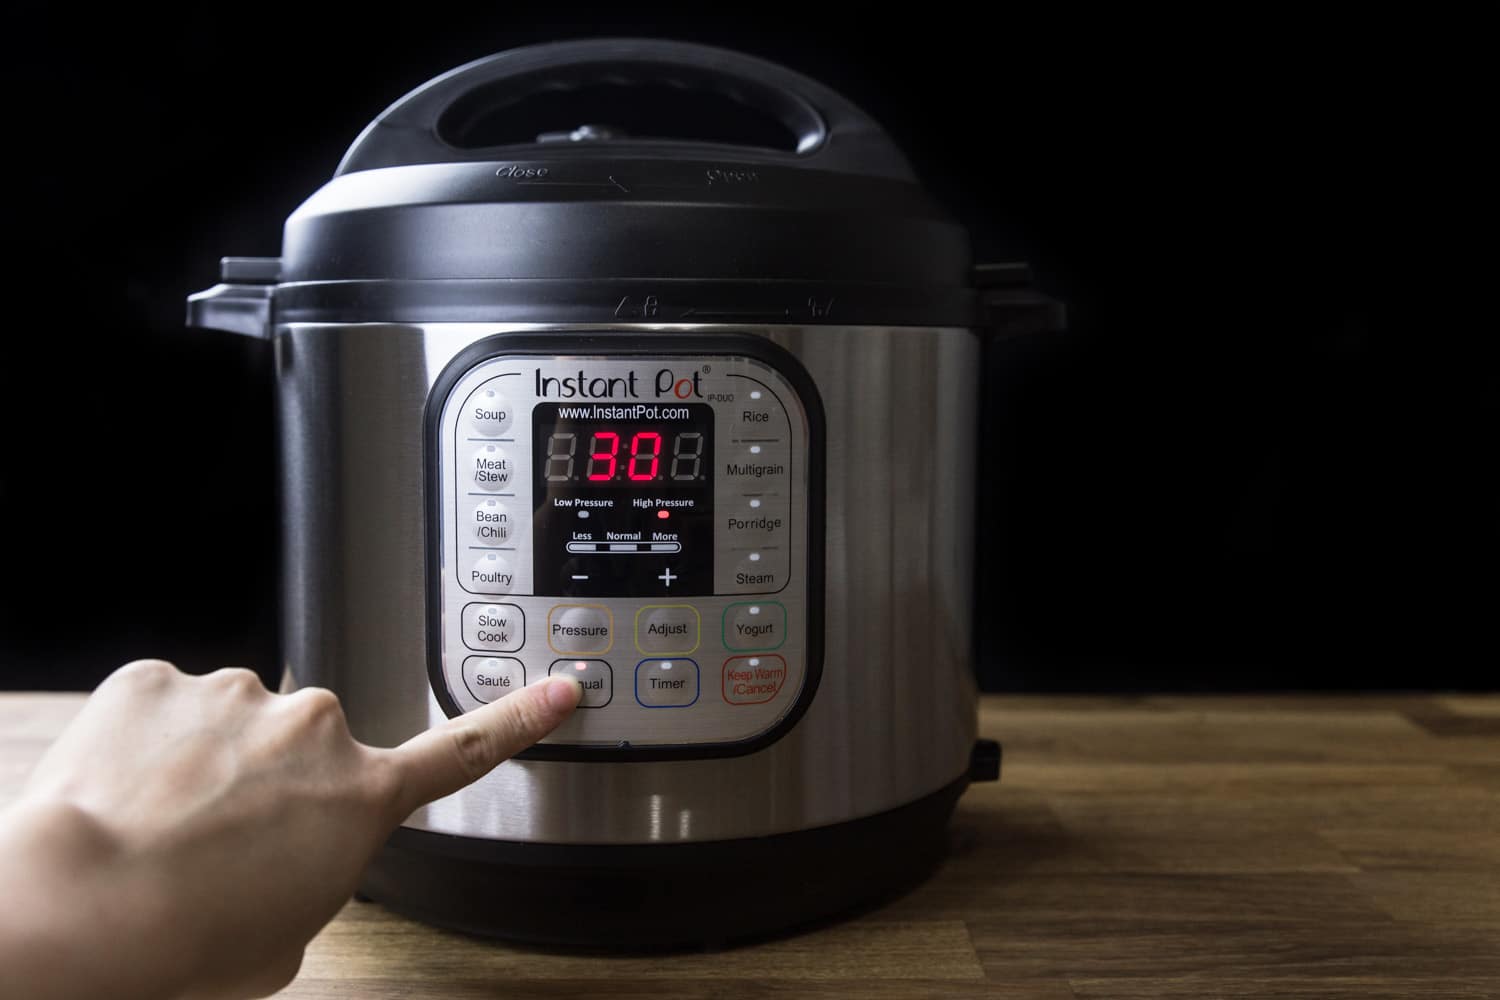 What Temperature Is Warm On Electric Pressure Cooker